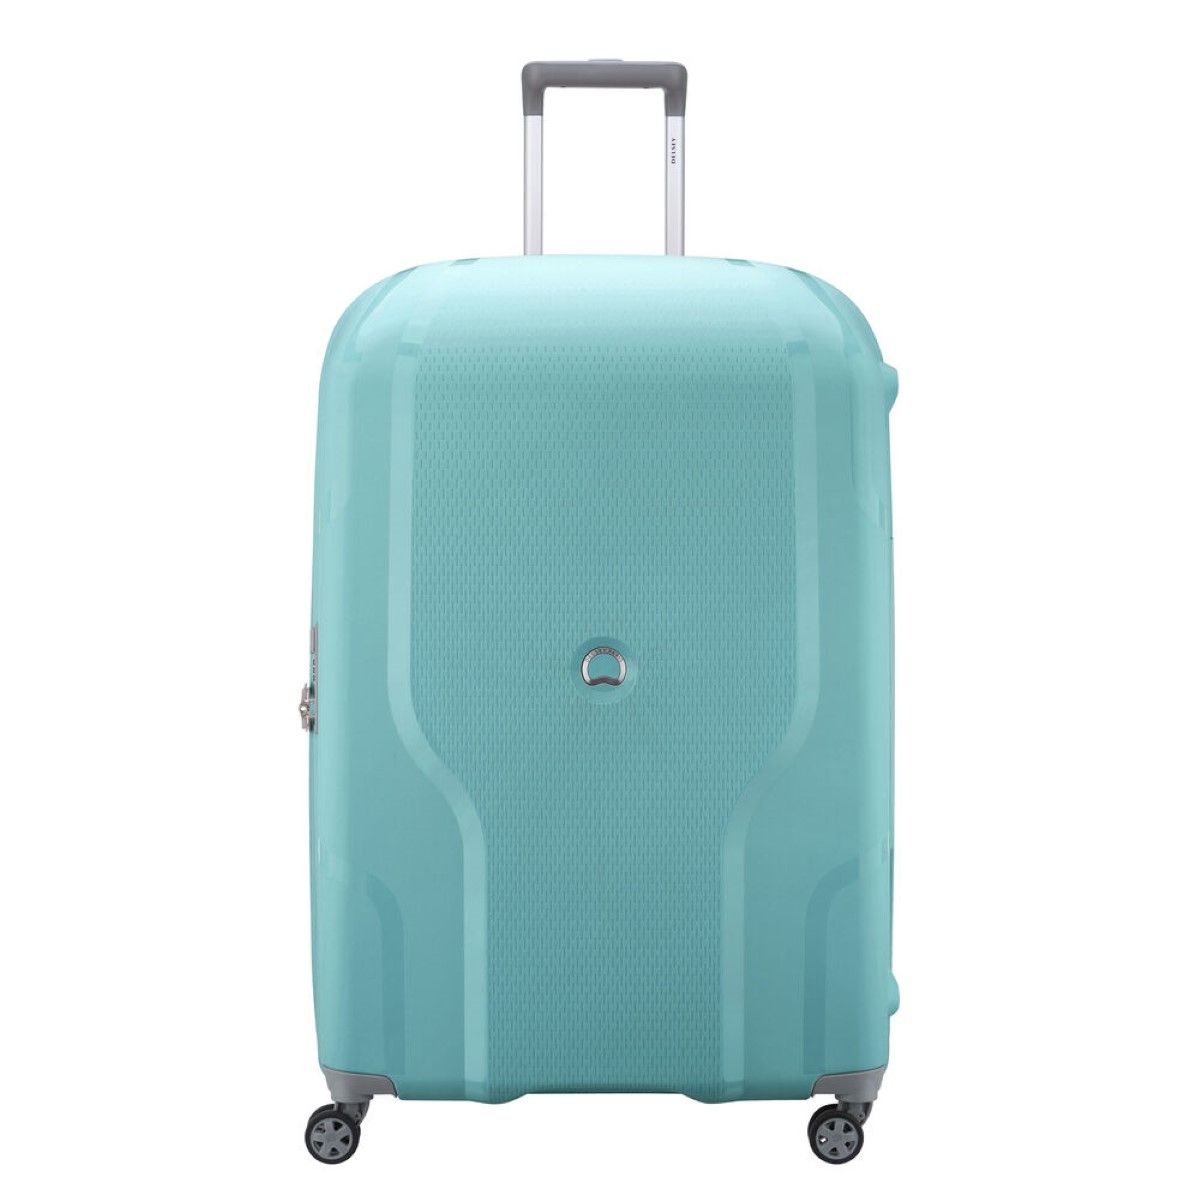 Expandable X-Large Trolley Clavel 83 cm Delsey, extra spacious hardcase trolley with four spinning wheels, zipped compartment, TSA combination lock, side handles, and telescopic double tube handle.